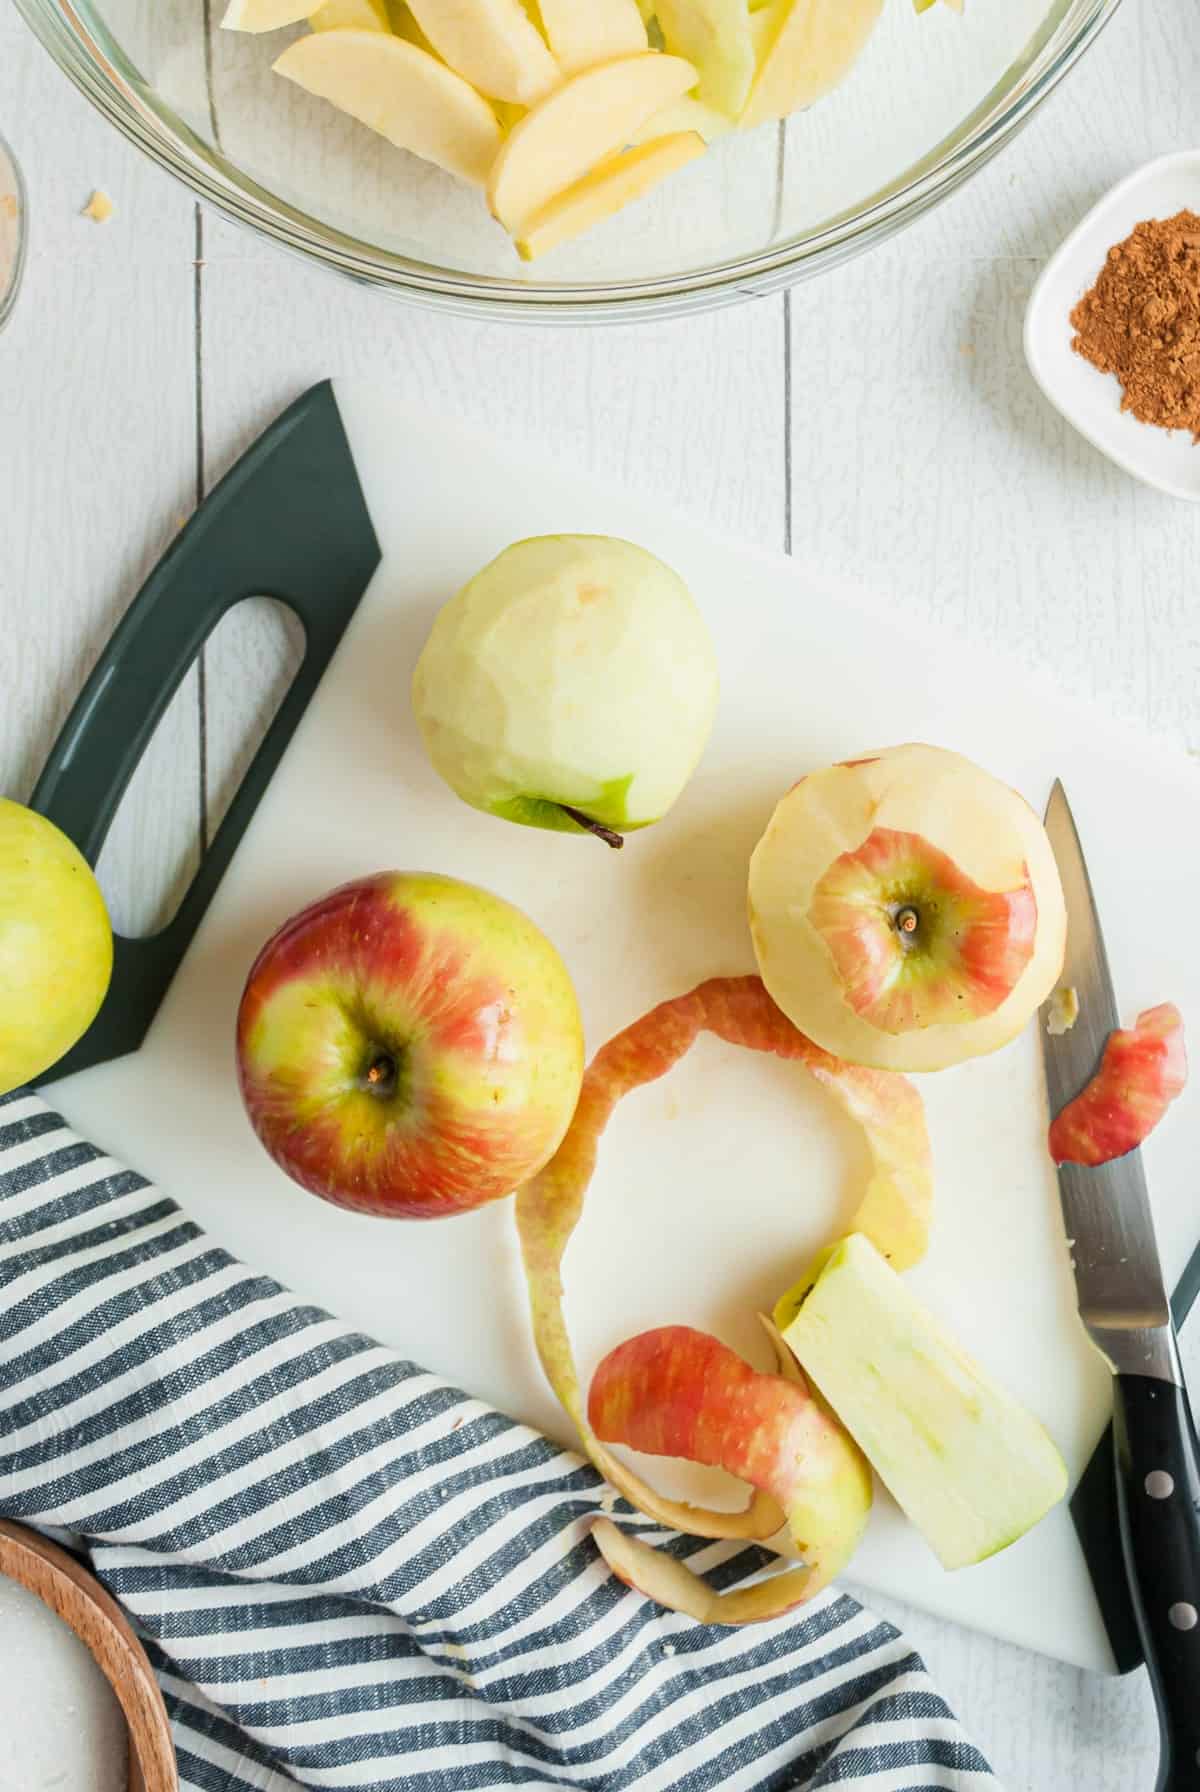 Apples on a white board being peeled.